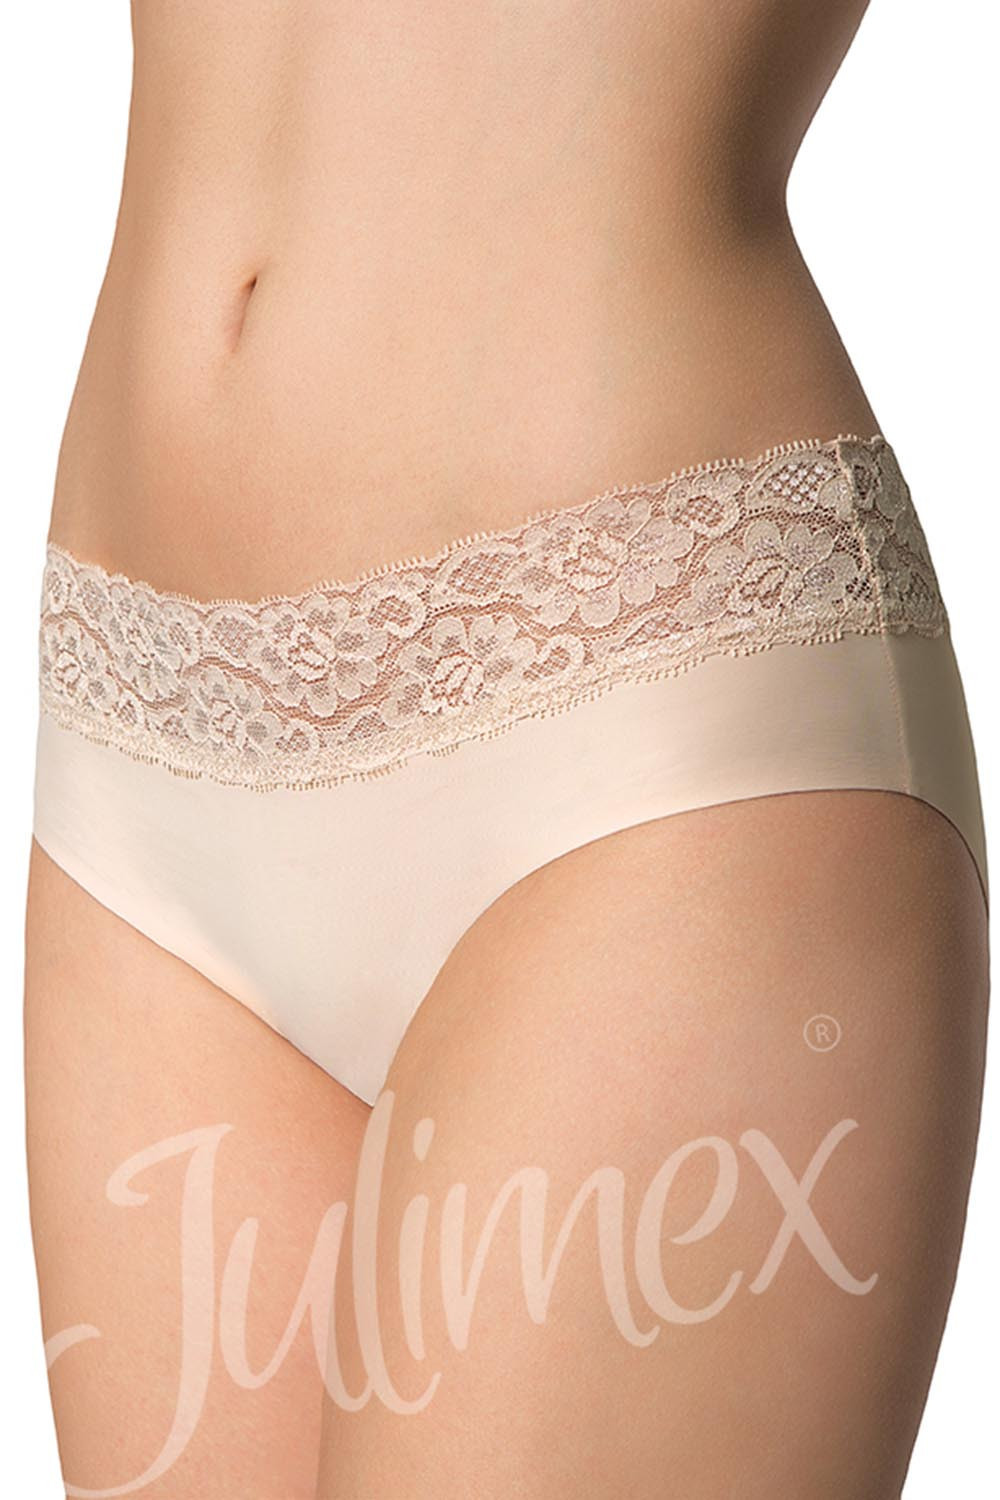 Julimex Hipster panty kolor:beżowy M